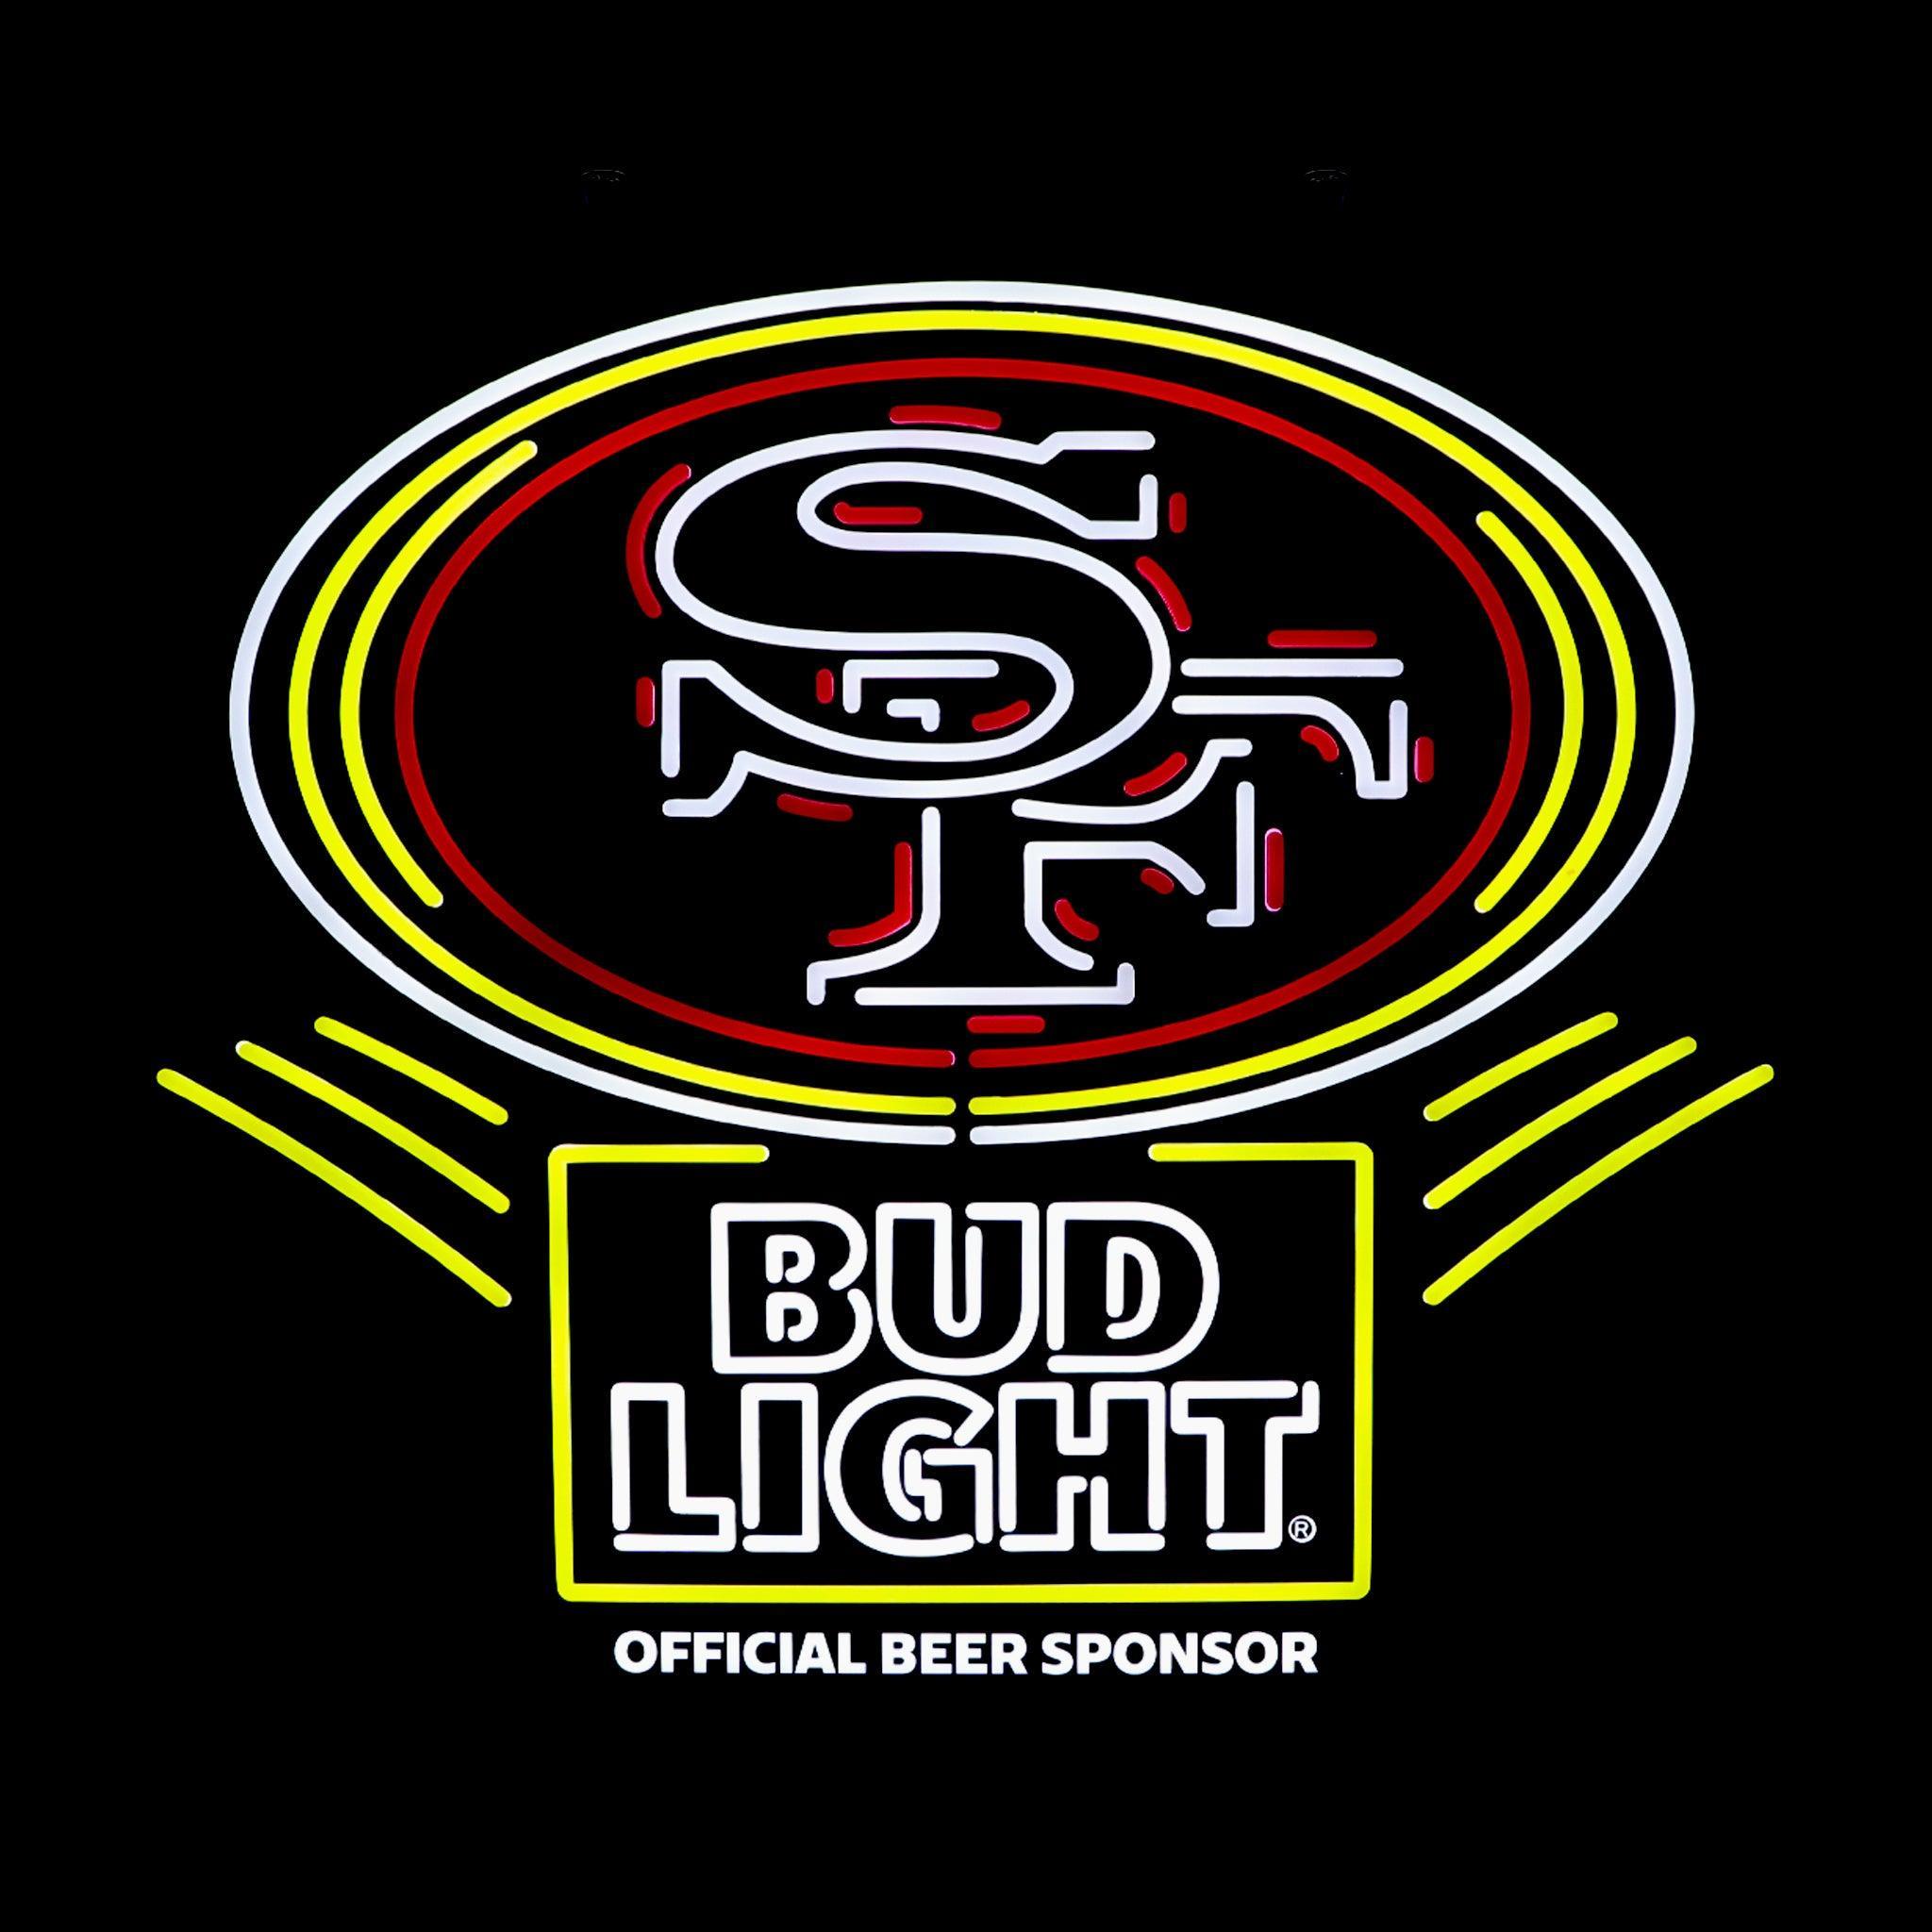 The Official Site of the San Francisco 49ers